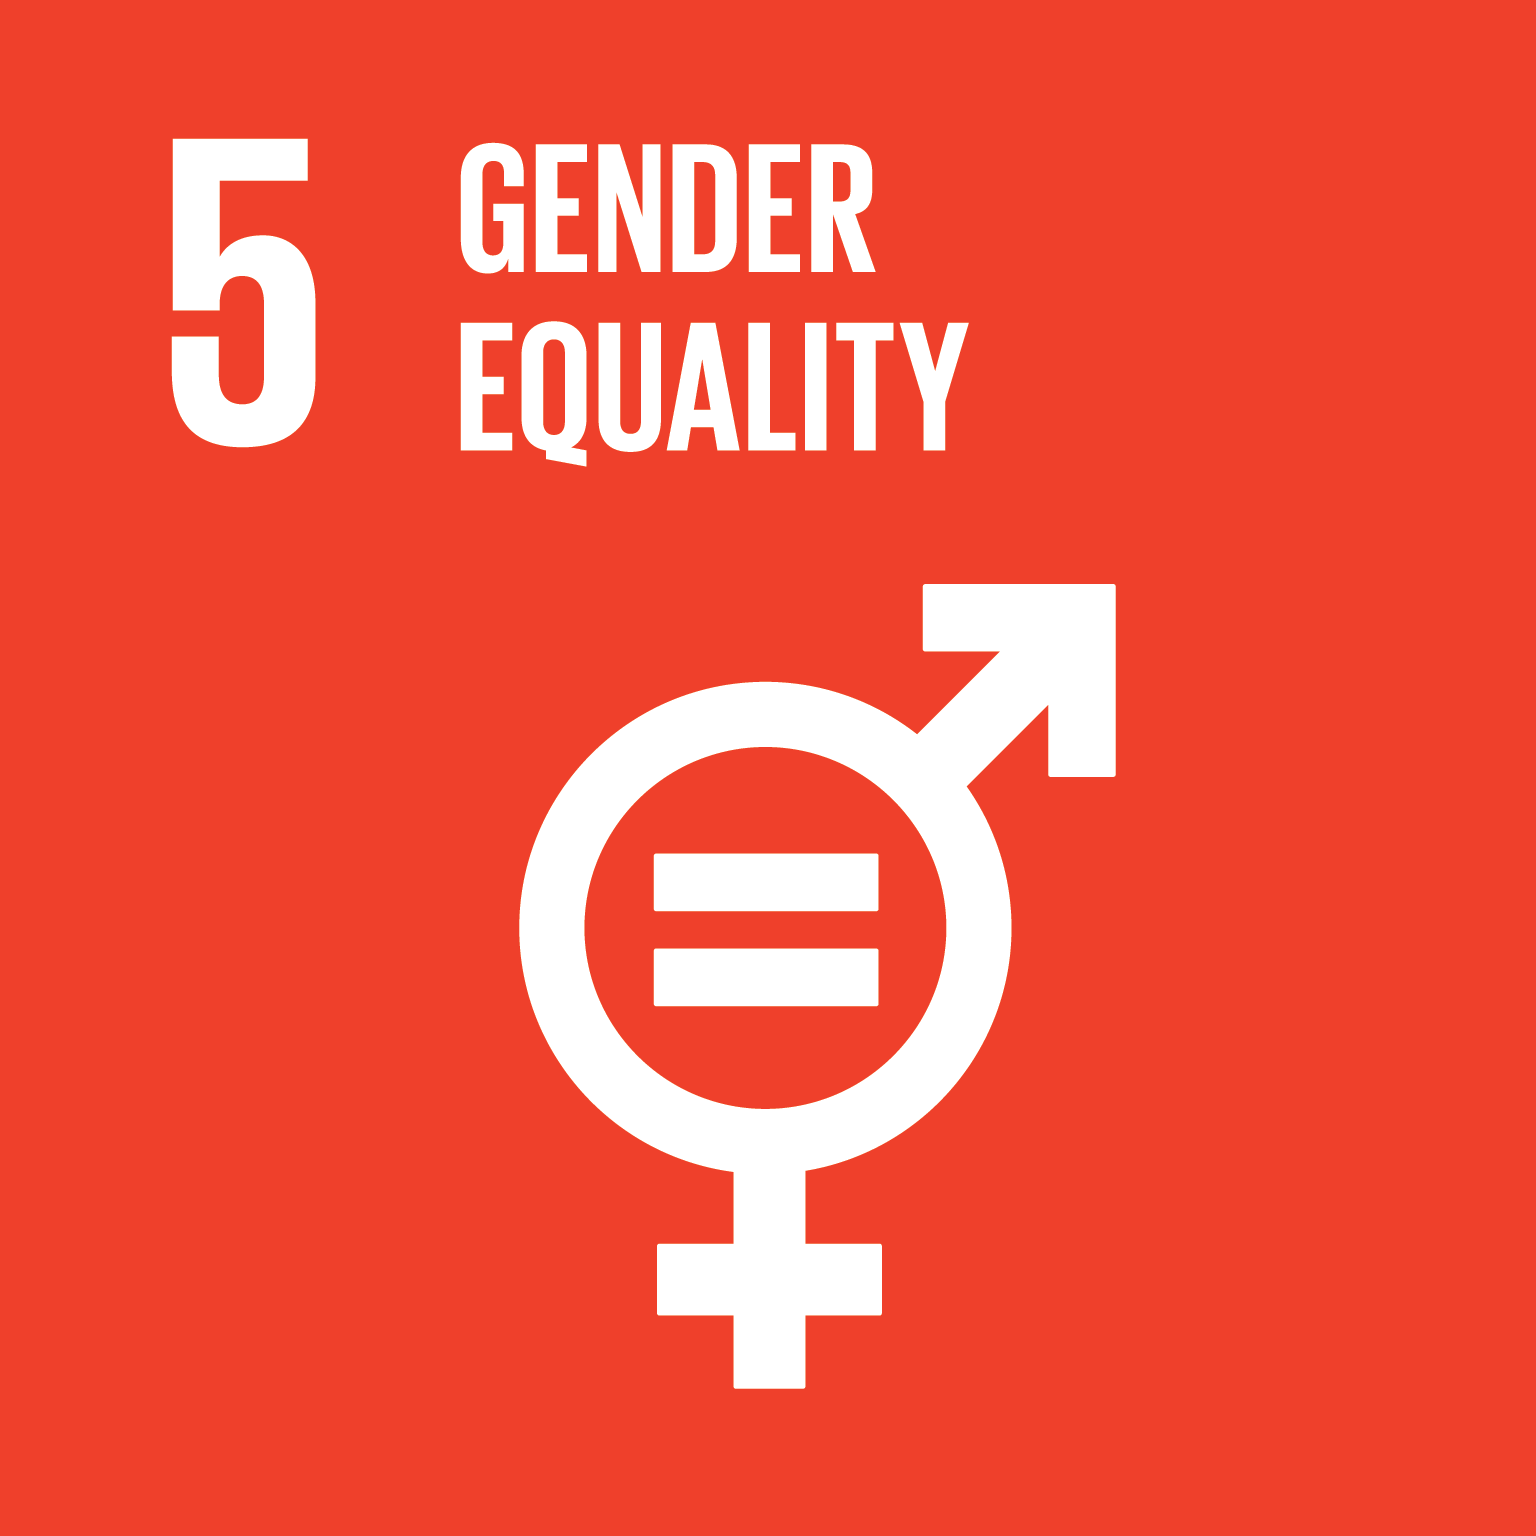 sustainable development goal 5 icon gender equality